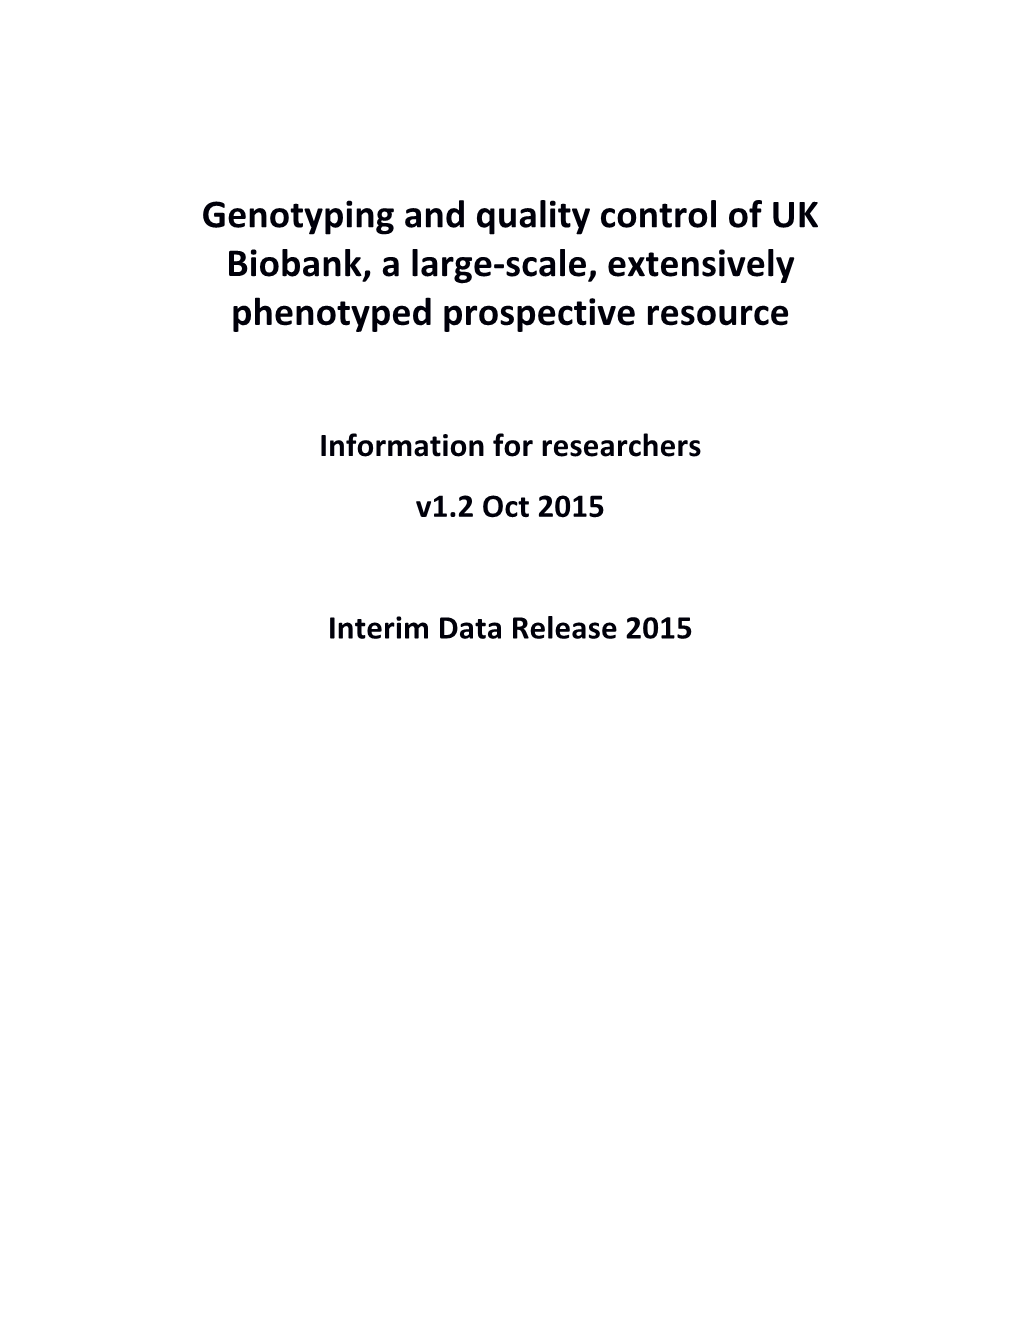 Genotyping and Quality Control of UK Biobank, a Large-Scale, Extensively Phenotyped Prospective Resource